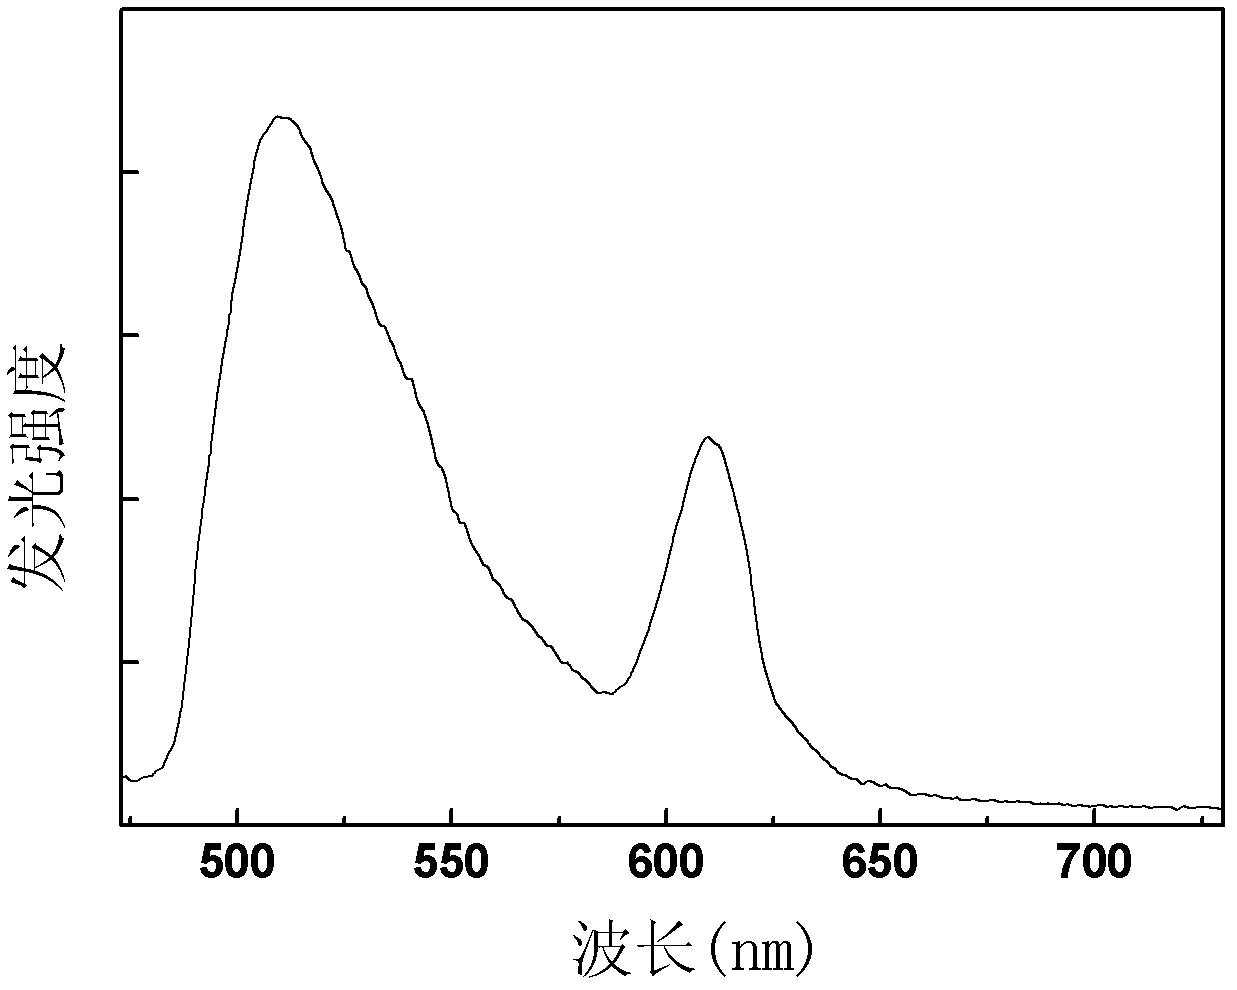 Europium-terbium co-doped zirconium phosphate luminescent material as well as preparation method and application thereof